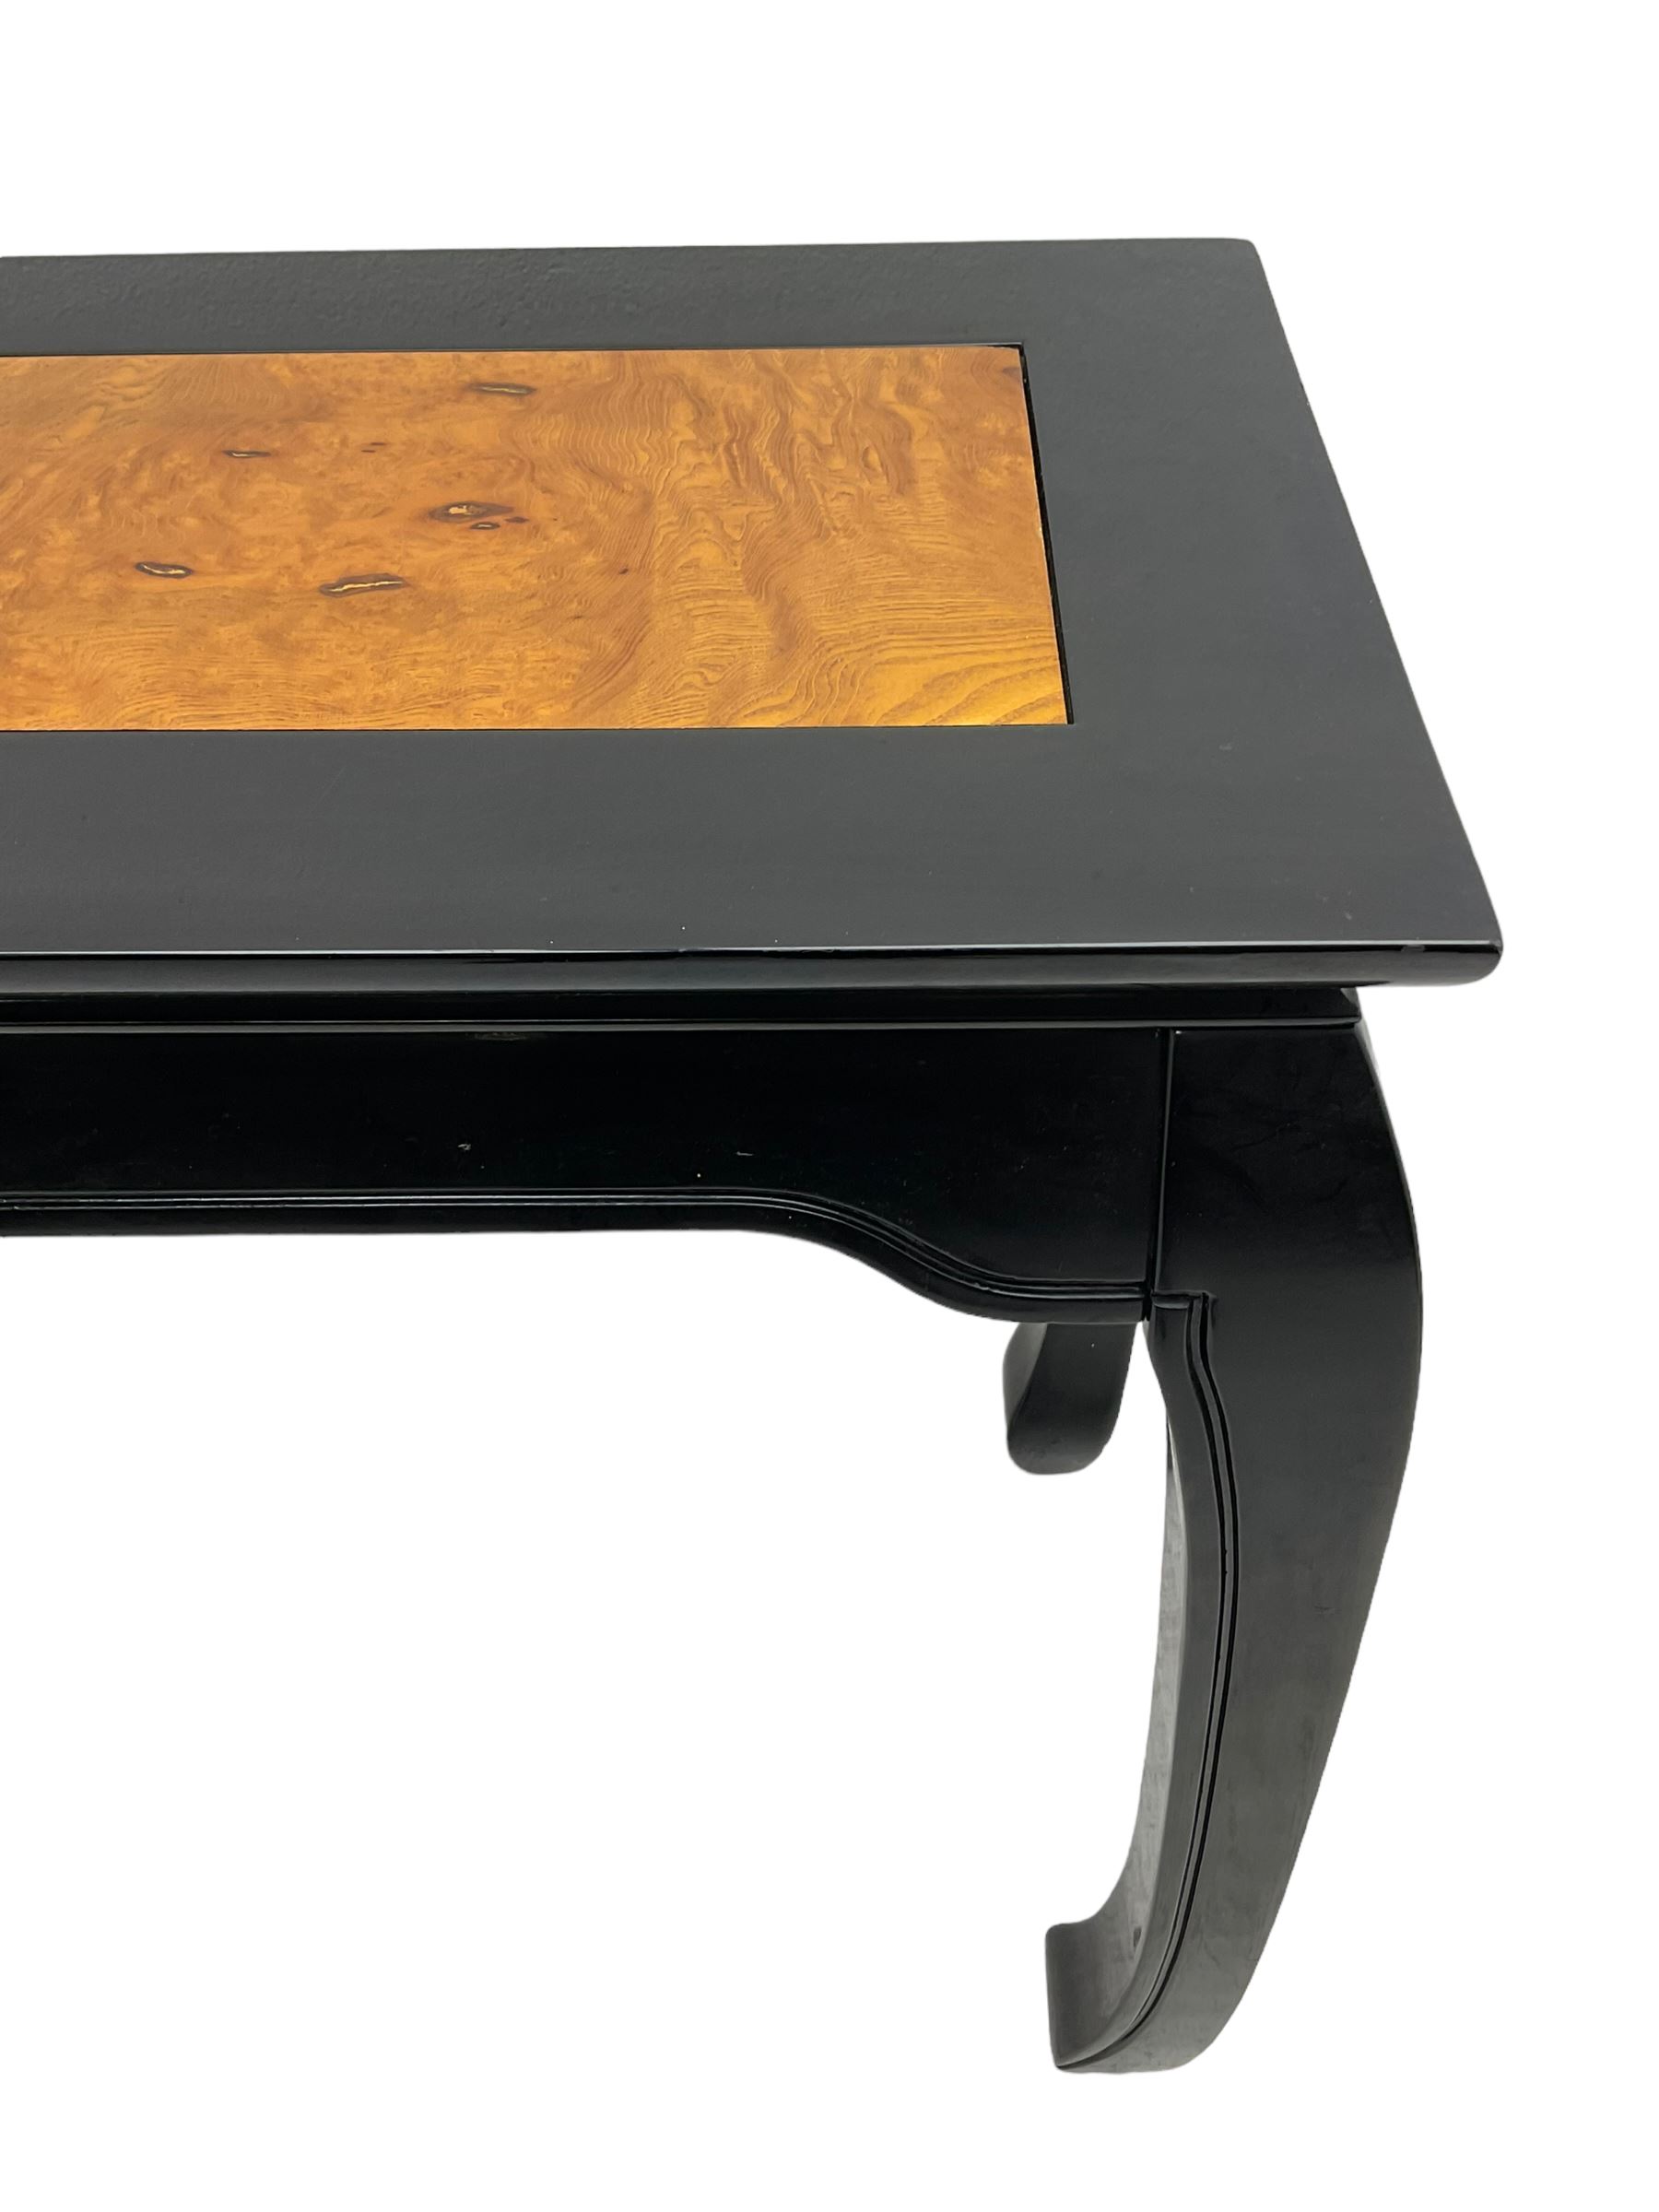 20th century Chinese ebonised lacquered console table - Image 3 of 5